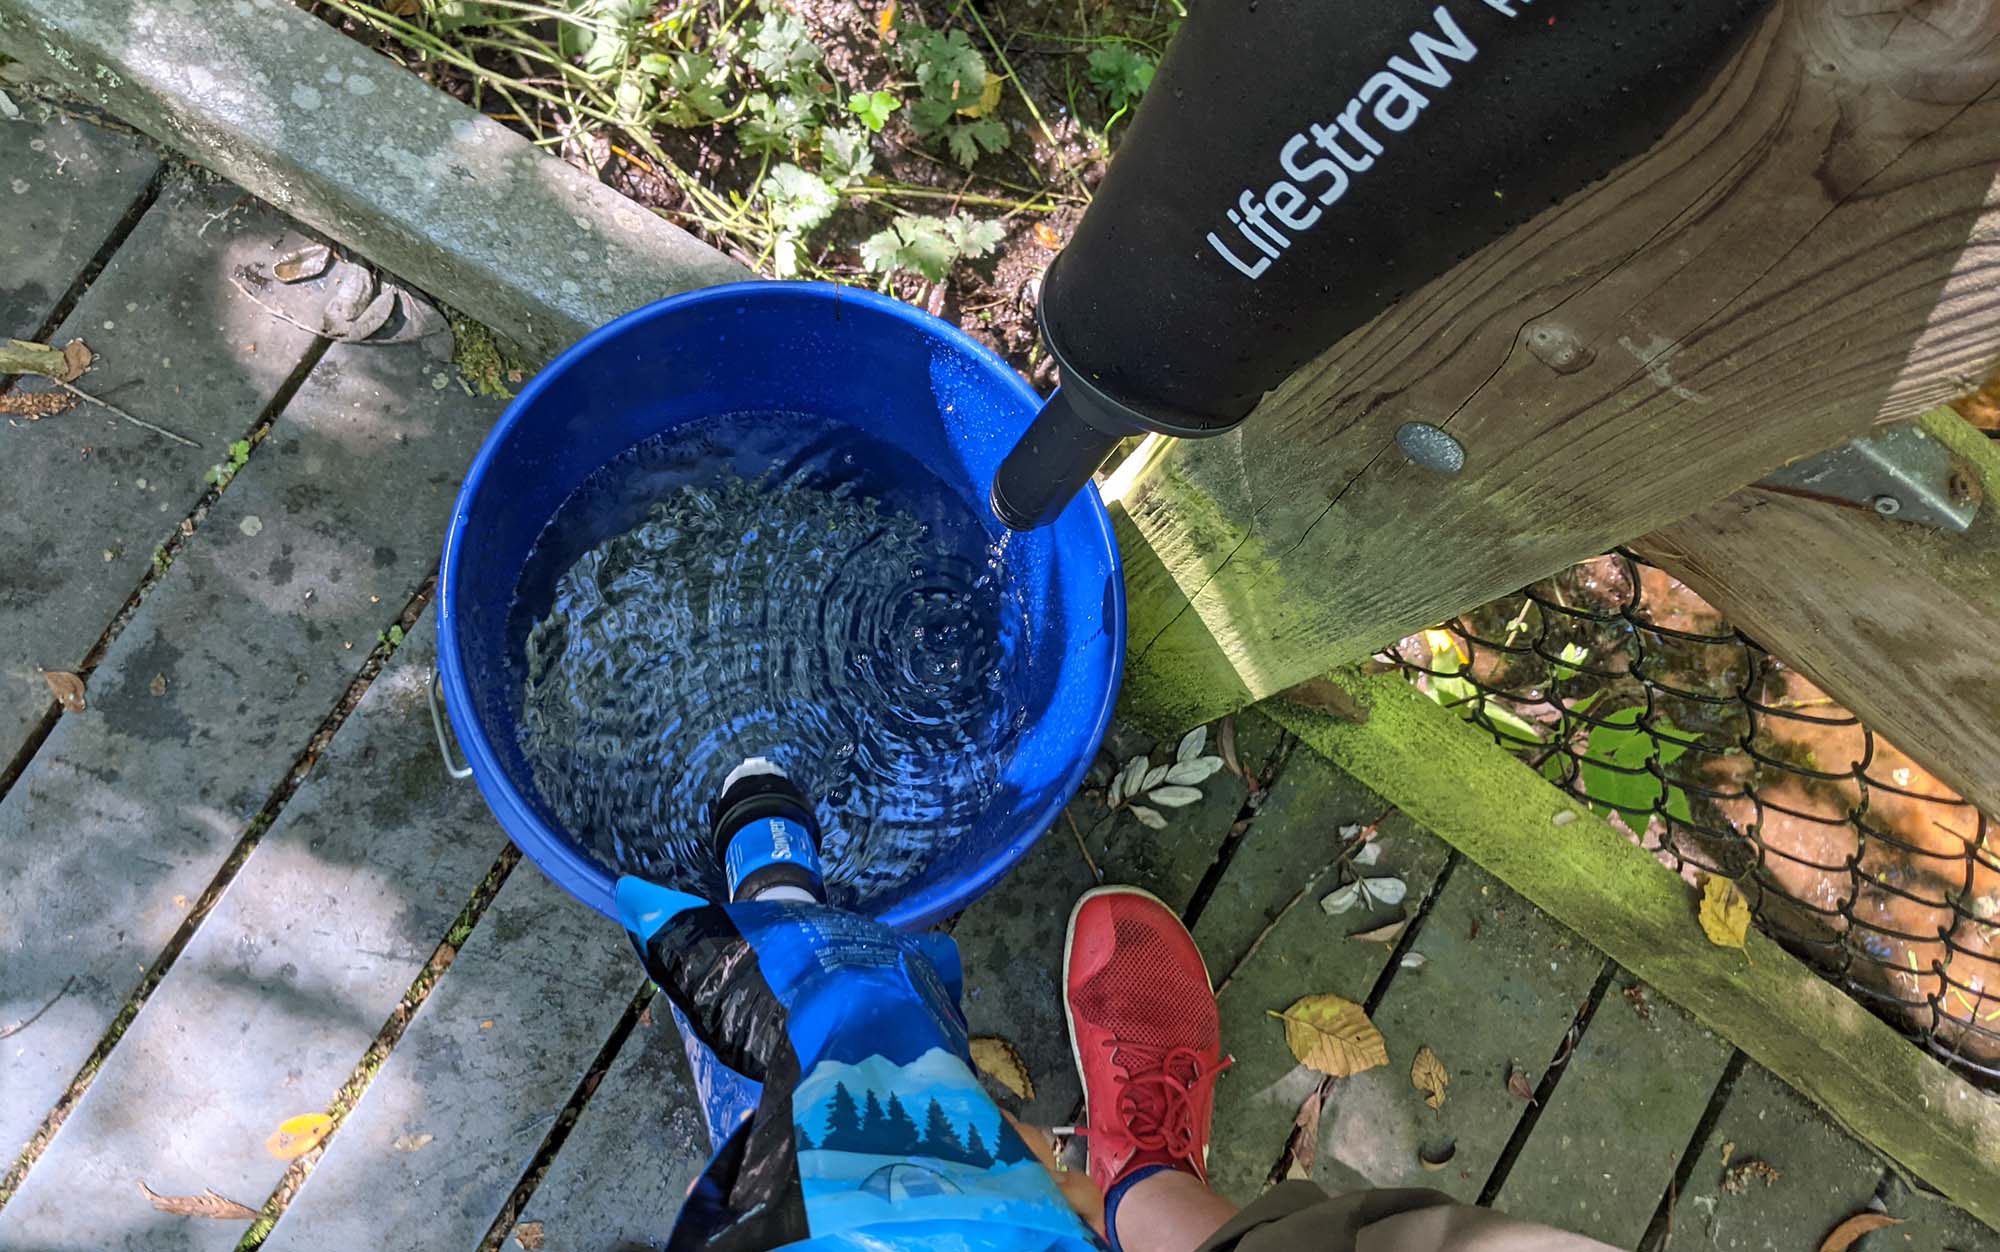 Author tests LifeStraw and Sawyer Squeeze water filters.